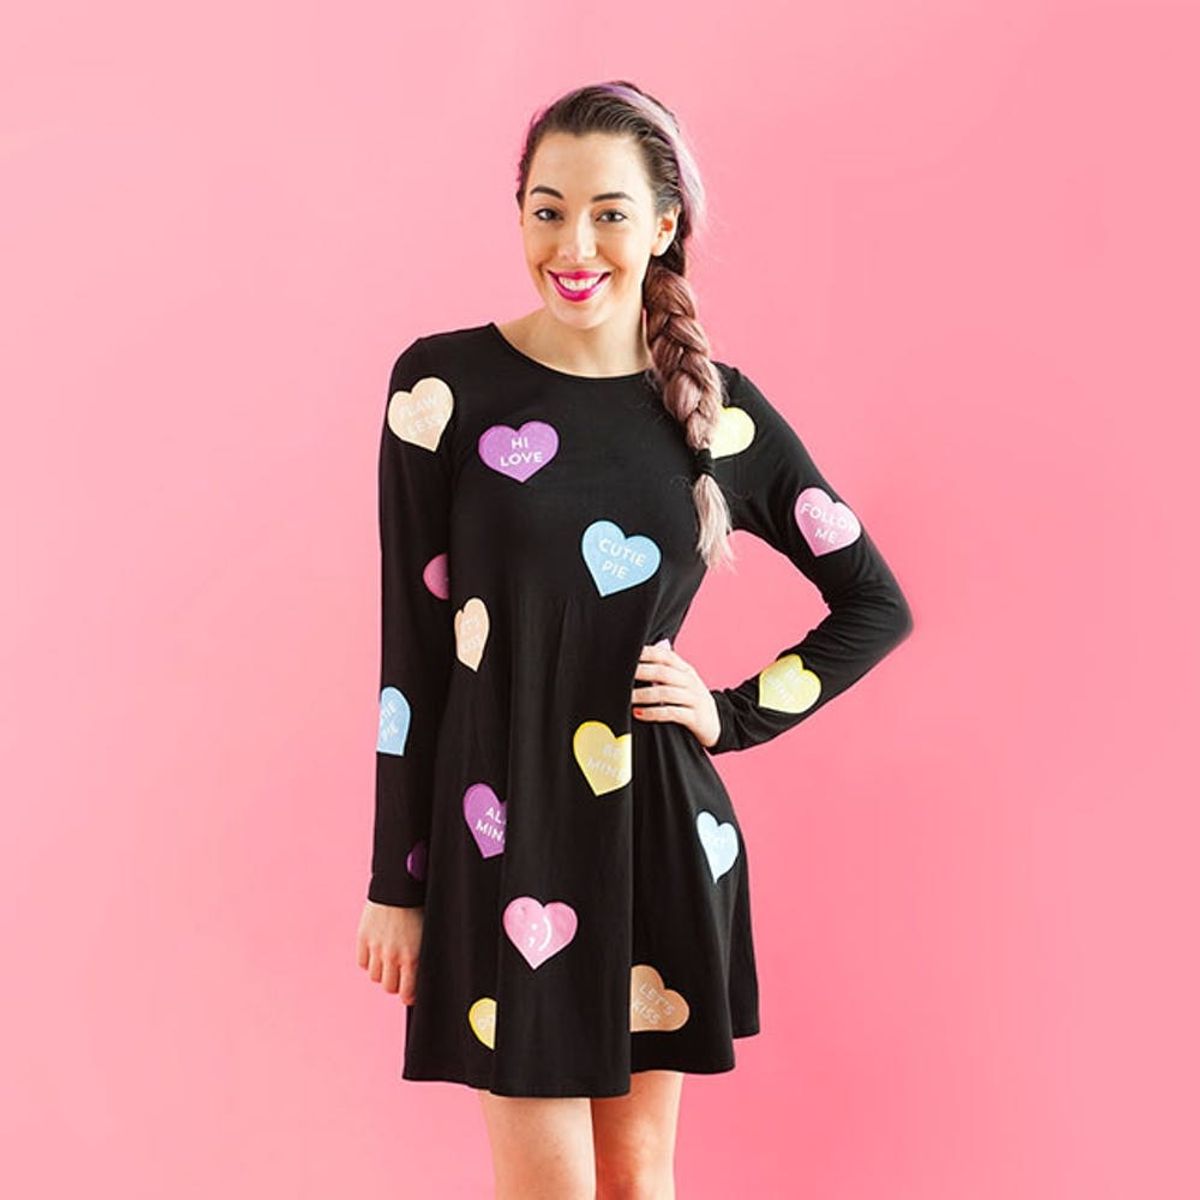 Make This Conversation Hearts Dress for Your Galentine’s Day Party